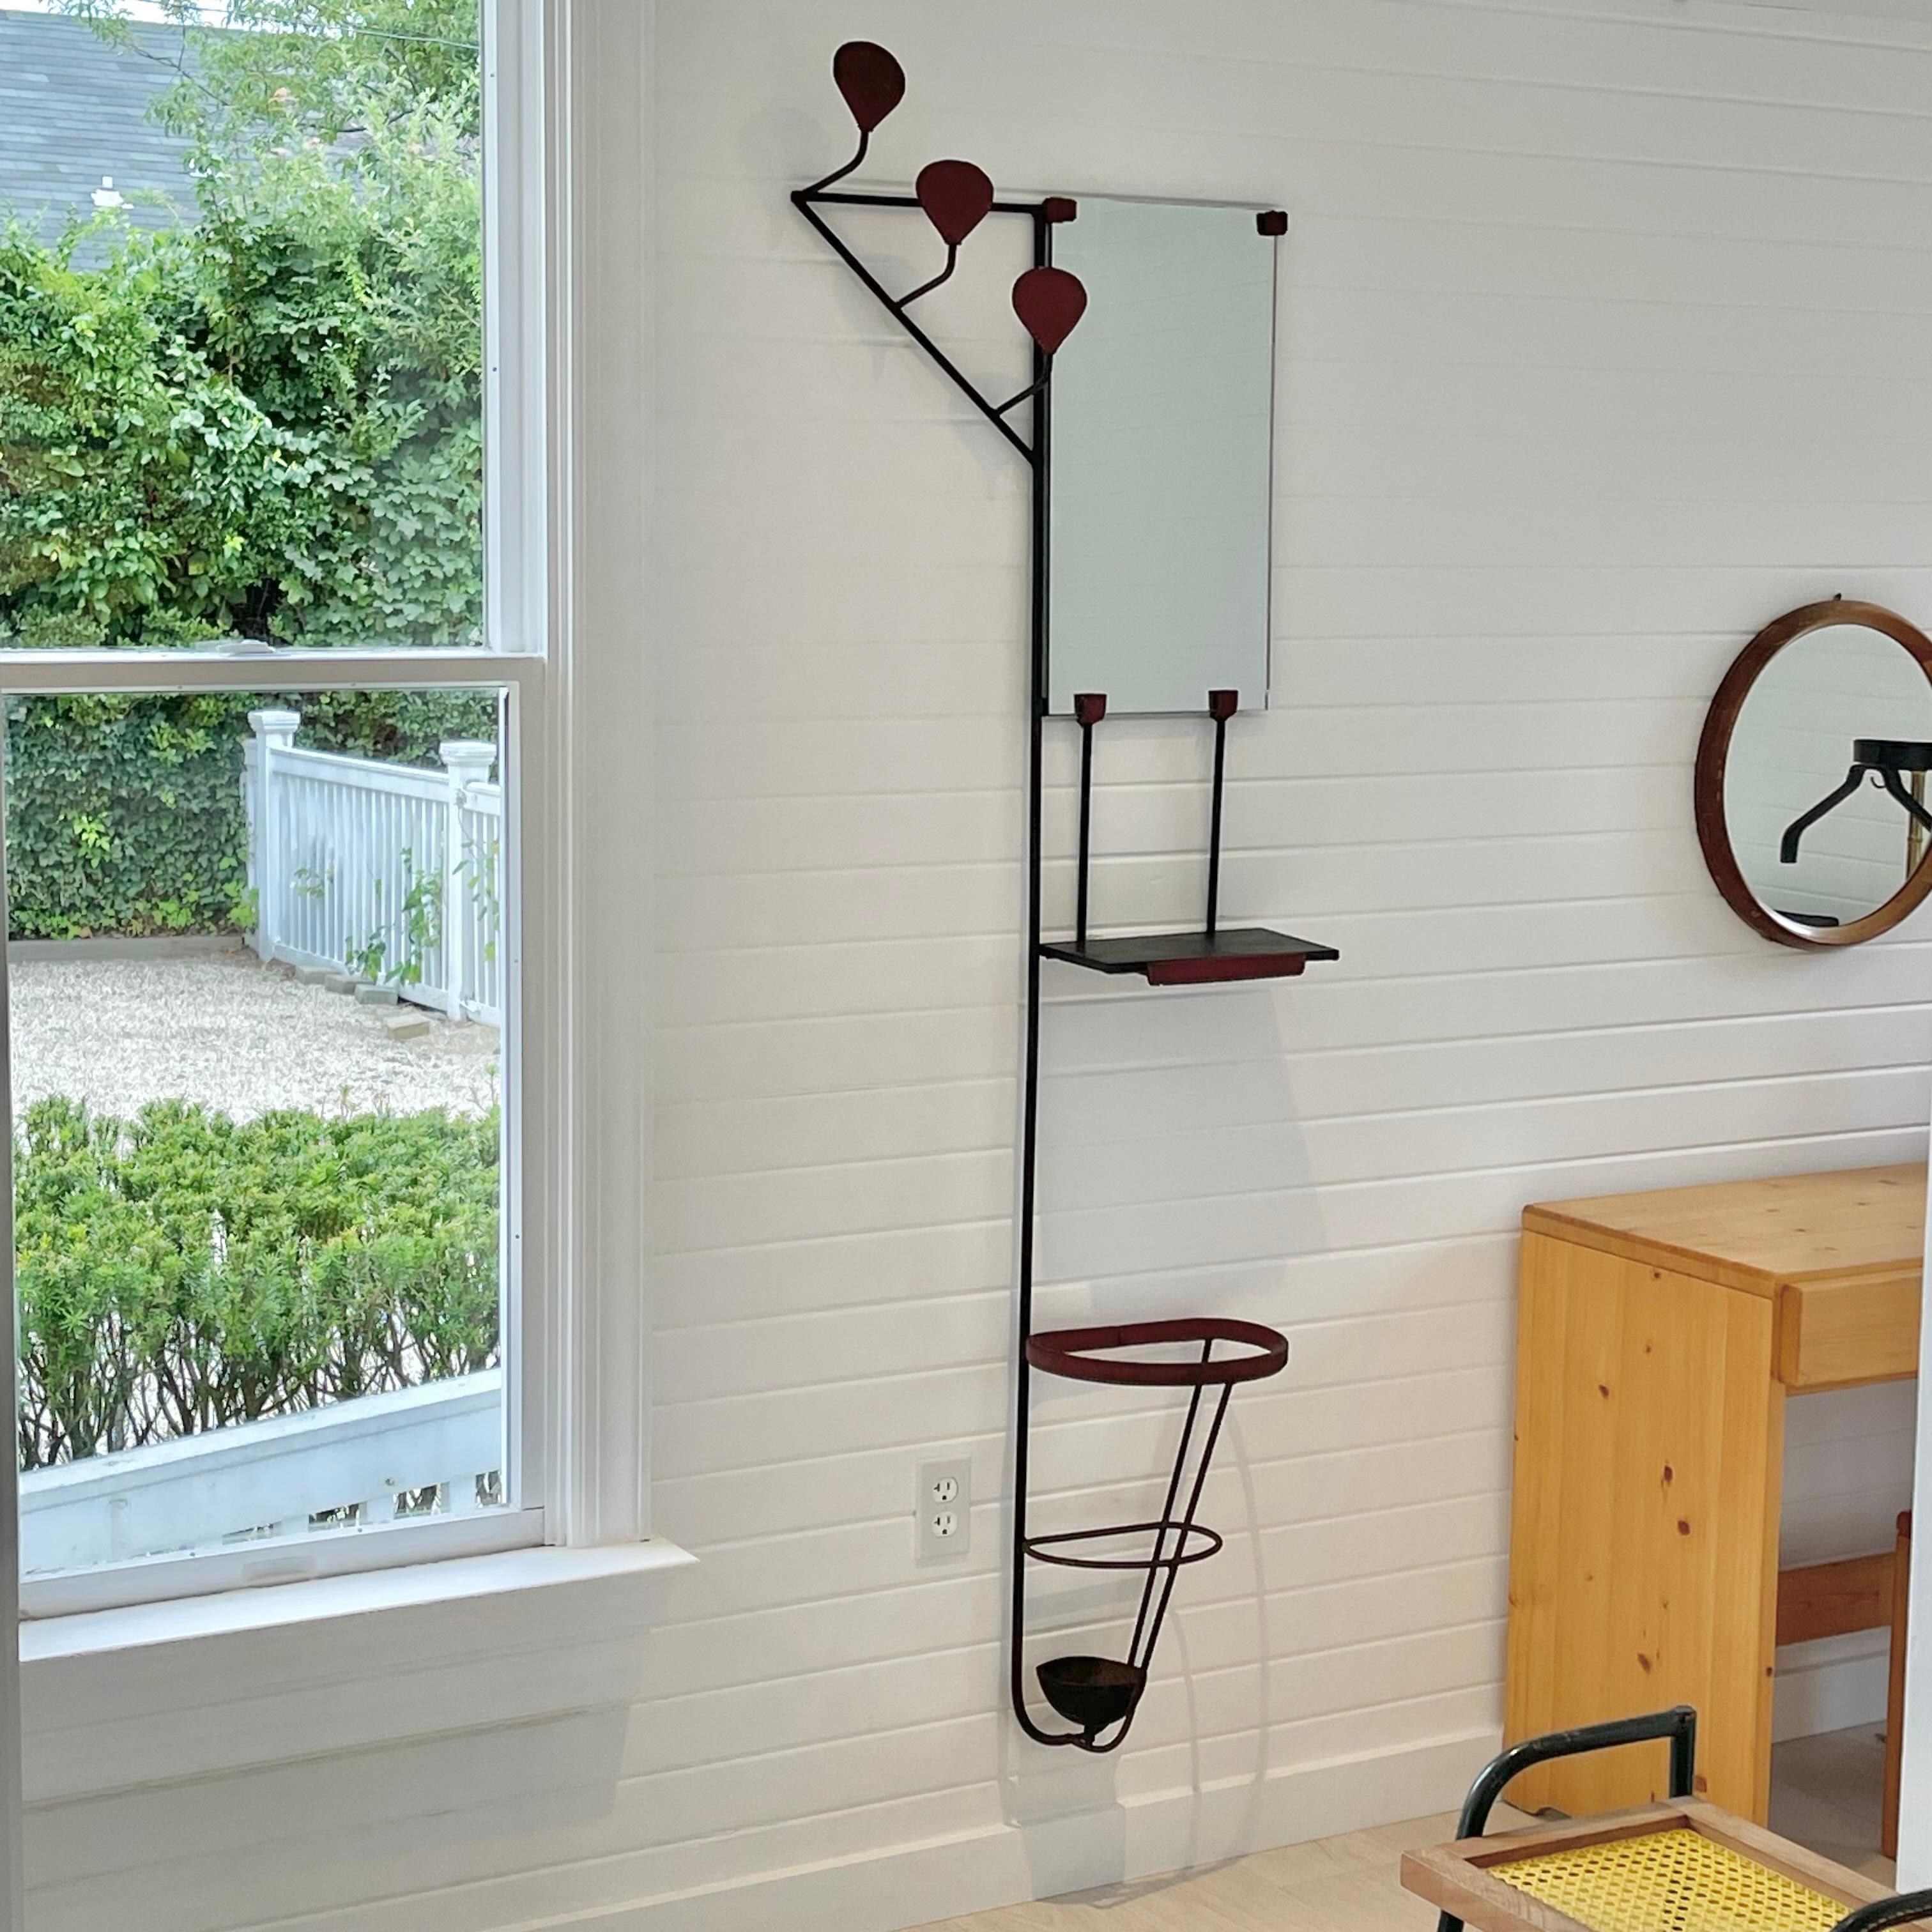 Stunning leather and iron wall rack by Jacques Adnet. Rack consists of three hooks descending from top left, a mirror and umbrella holder. A small shelf suspends from mirror, perfect for wallet, keys etc. Original water catcher at bottom of umbrella